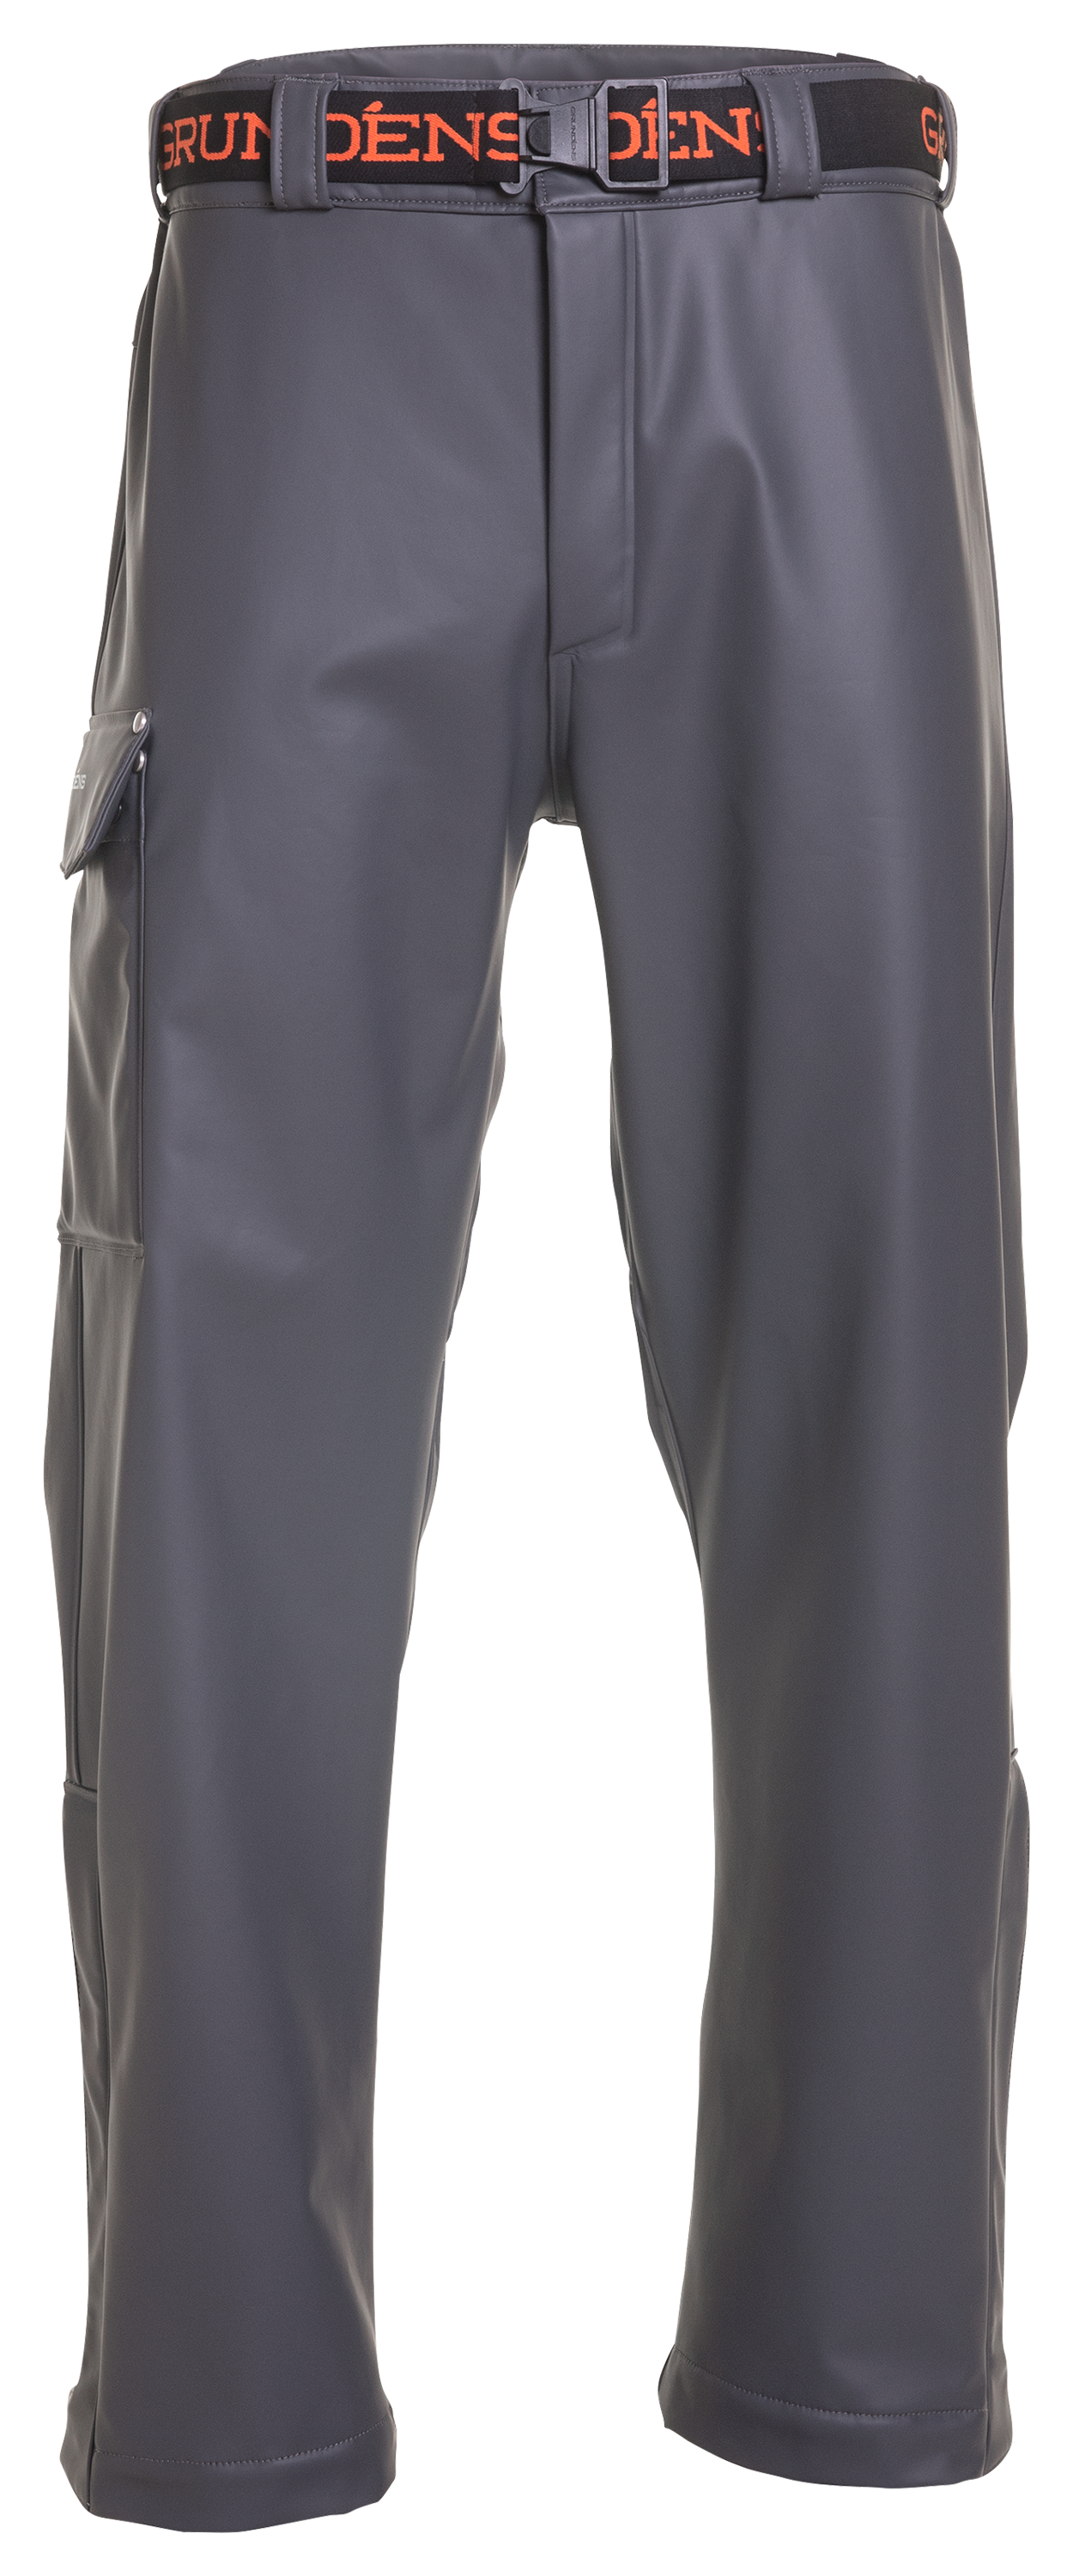 Grundens USA Neptune Thermo Pants for Men | Bass Pro Shops